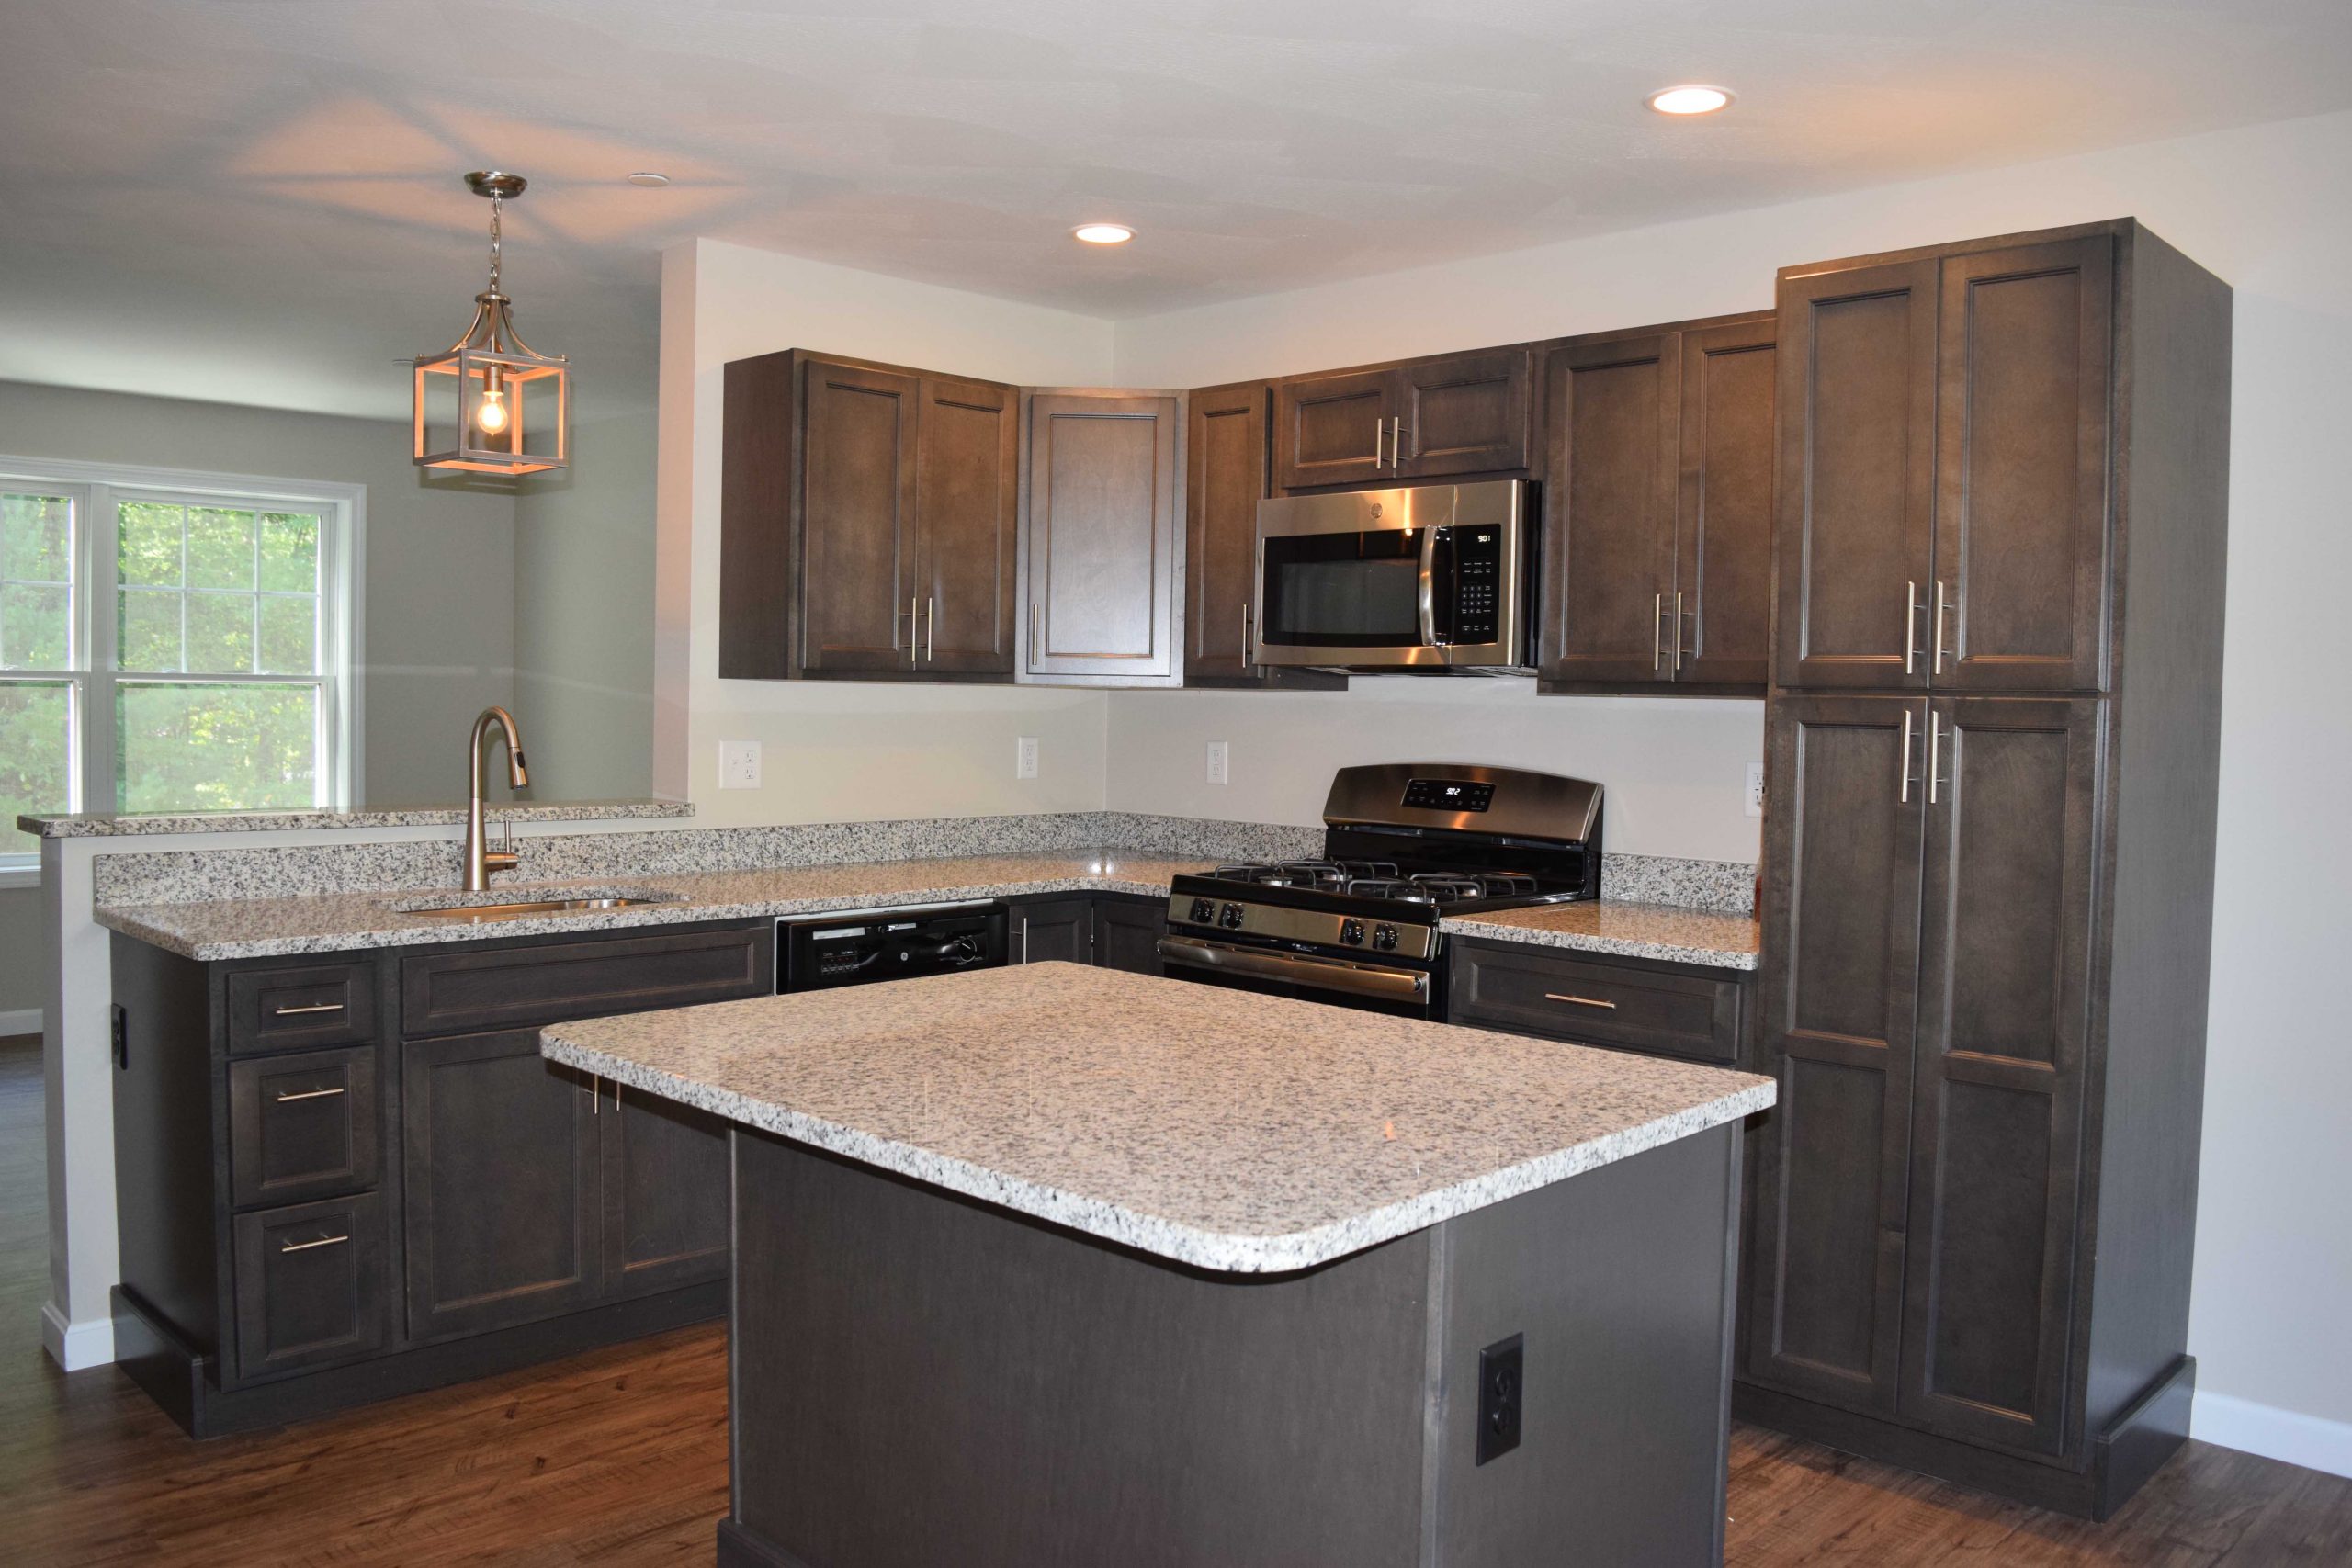 The Timbers kitchen by Socha Companies is a quality townhouse community in Manchester, NH